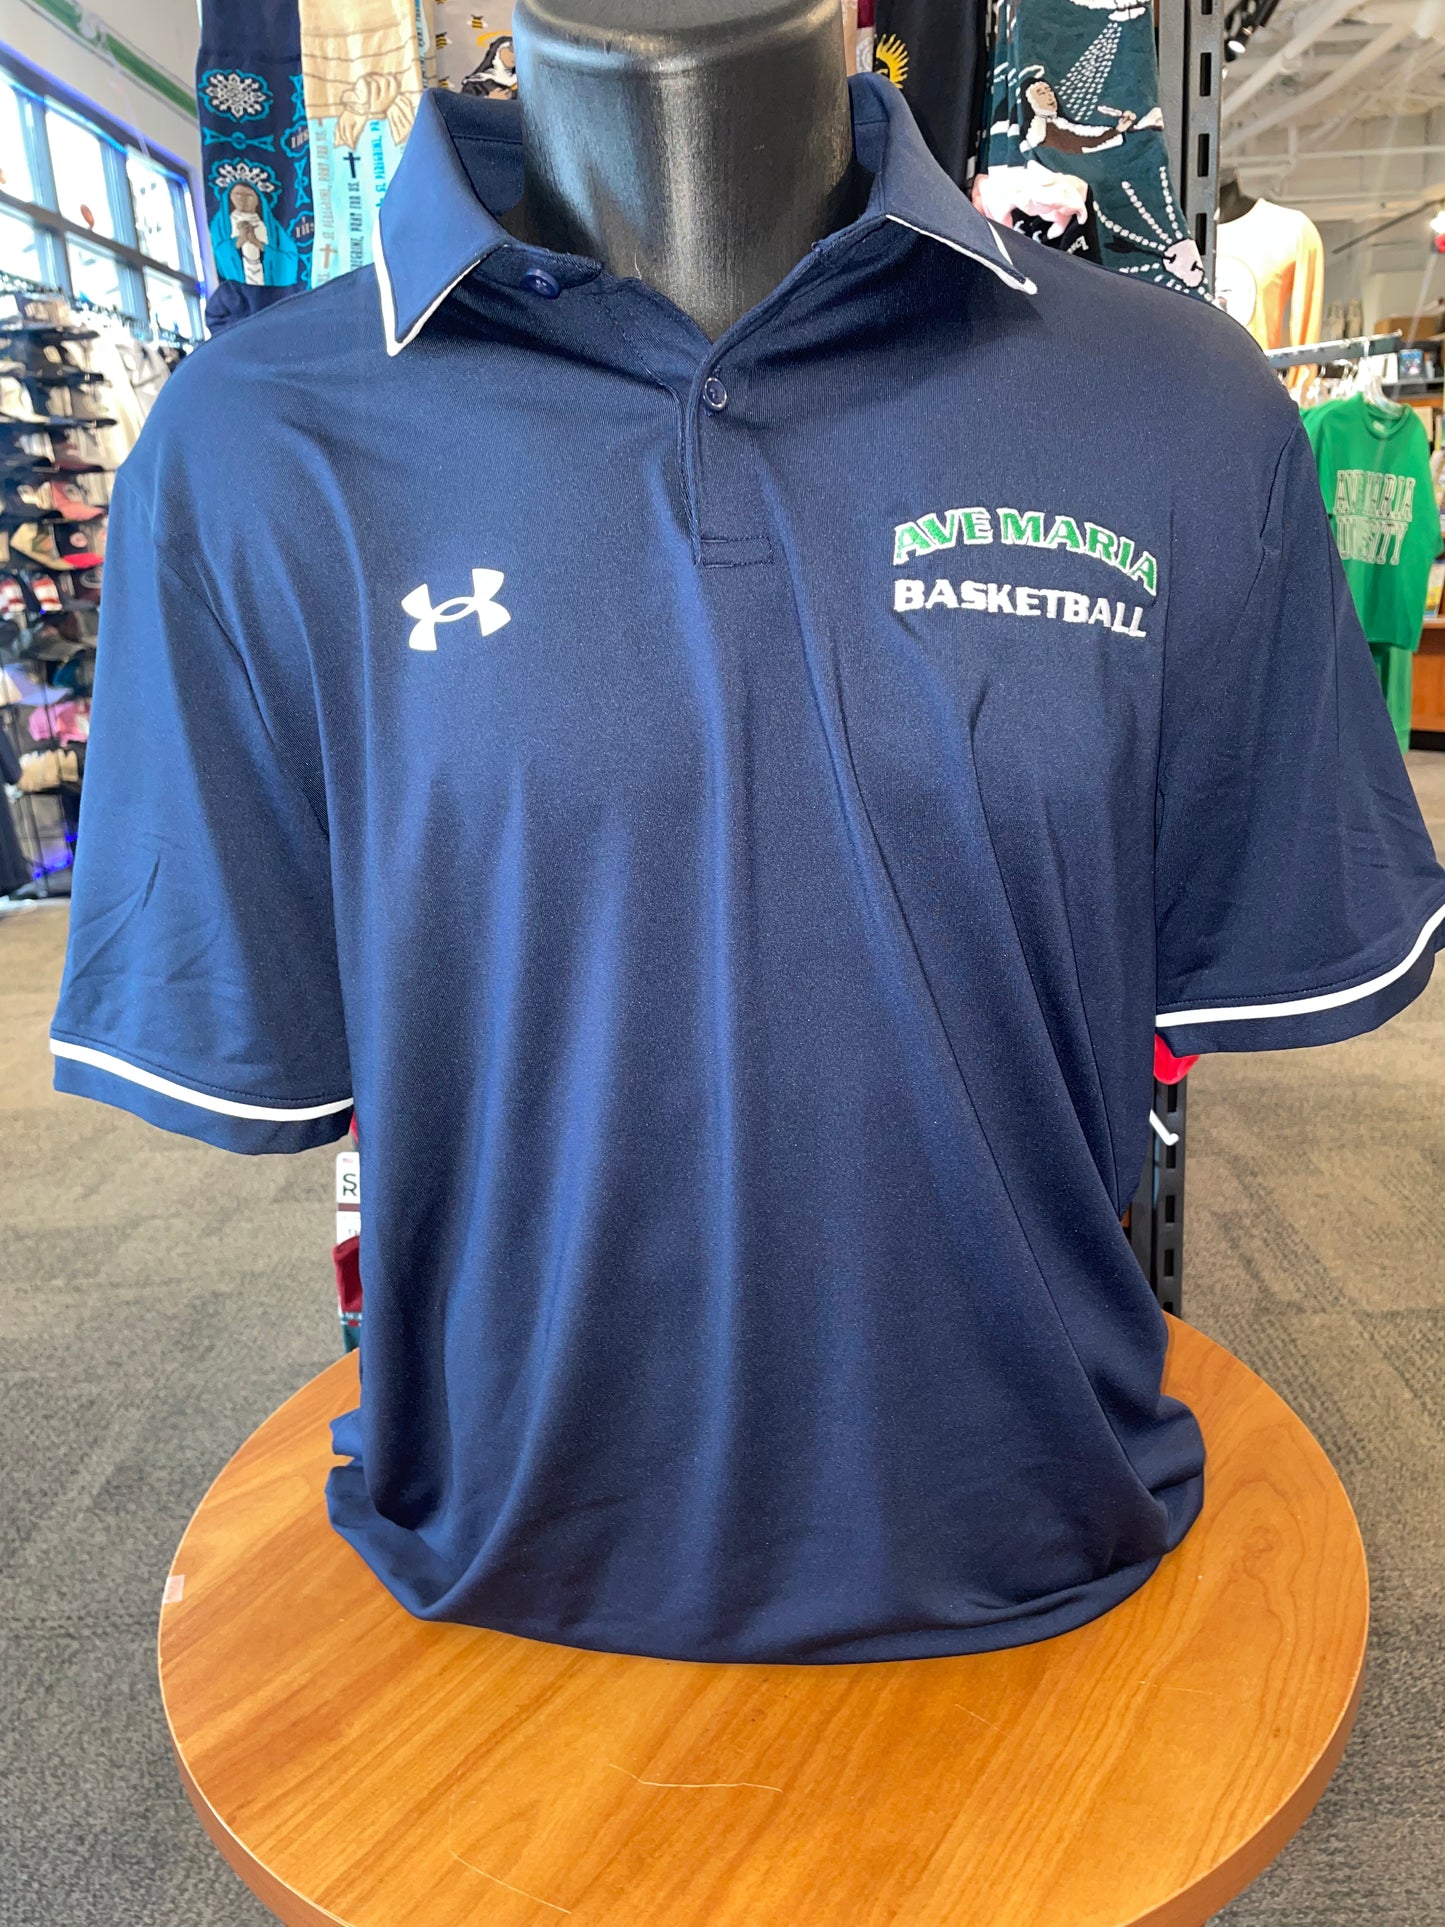 Under Armor Basketball Polo - Kelly and Navy